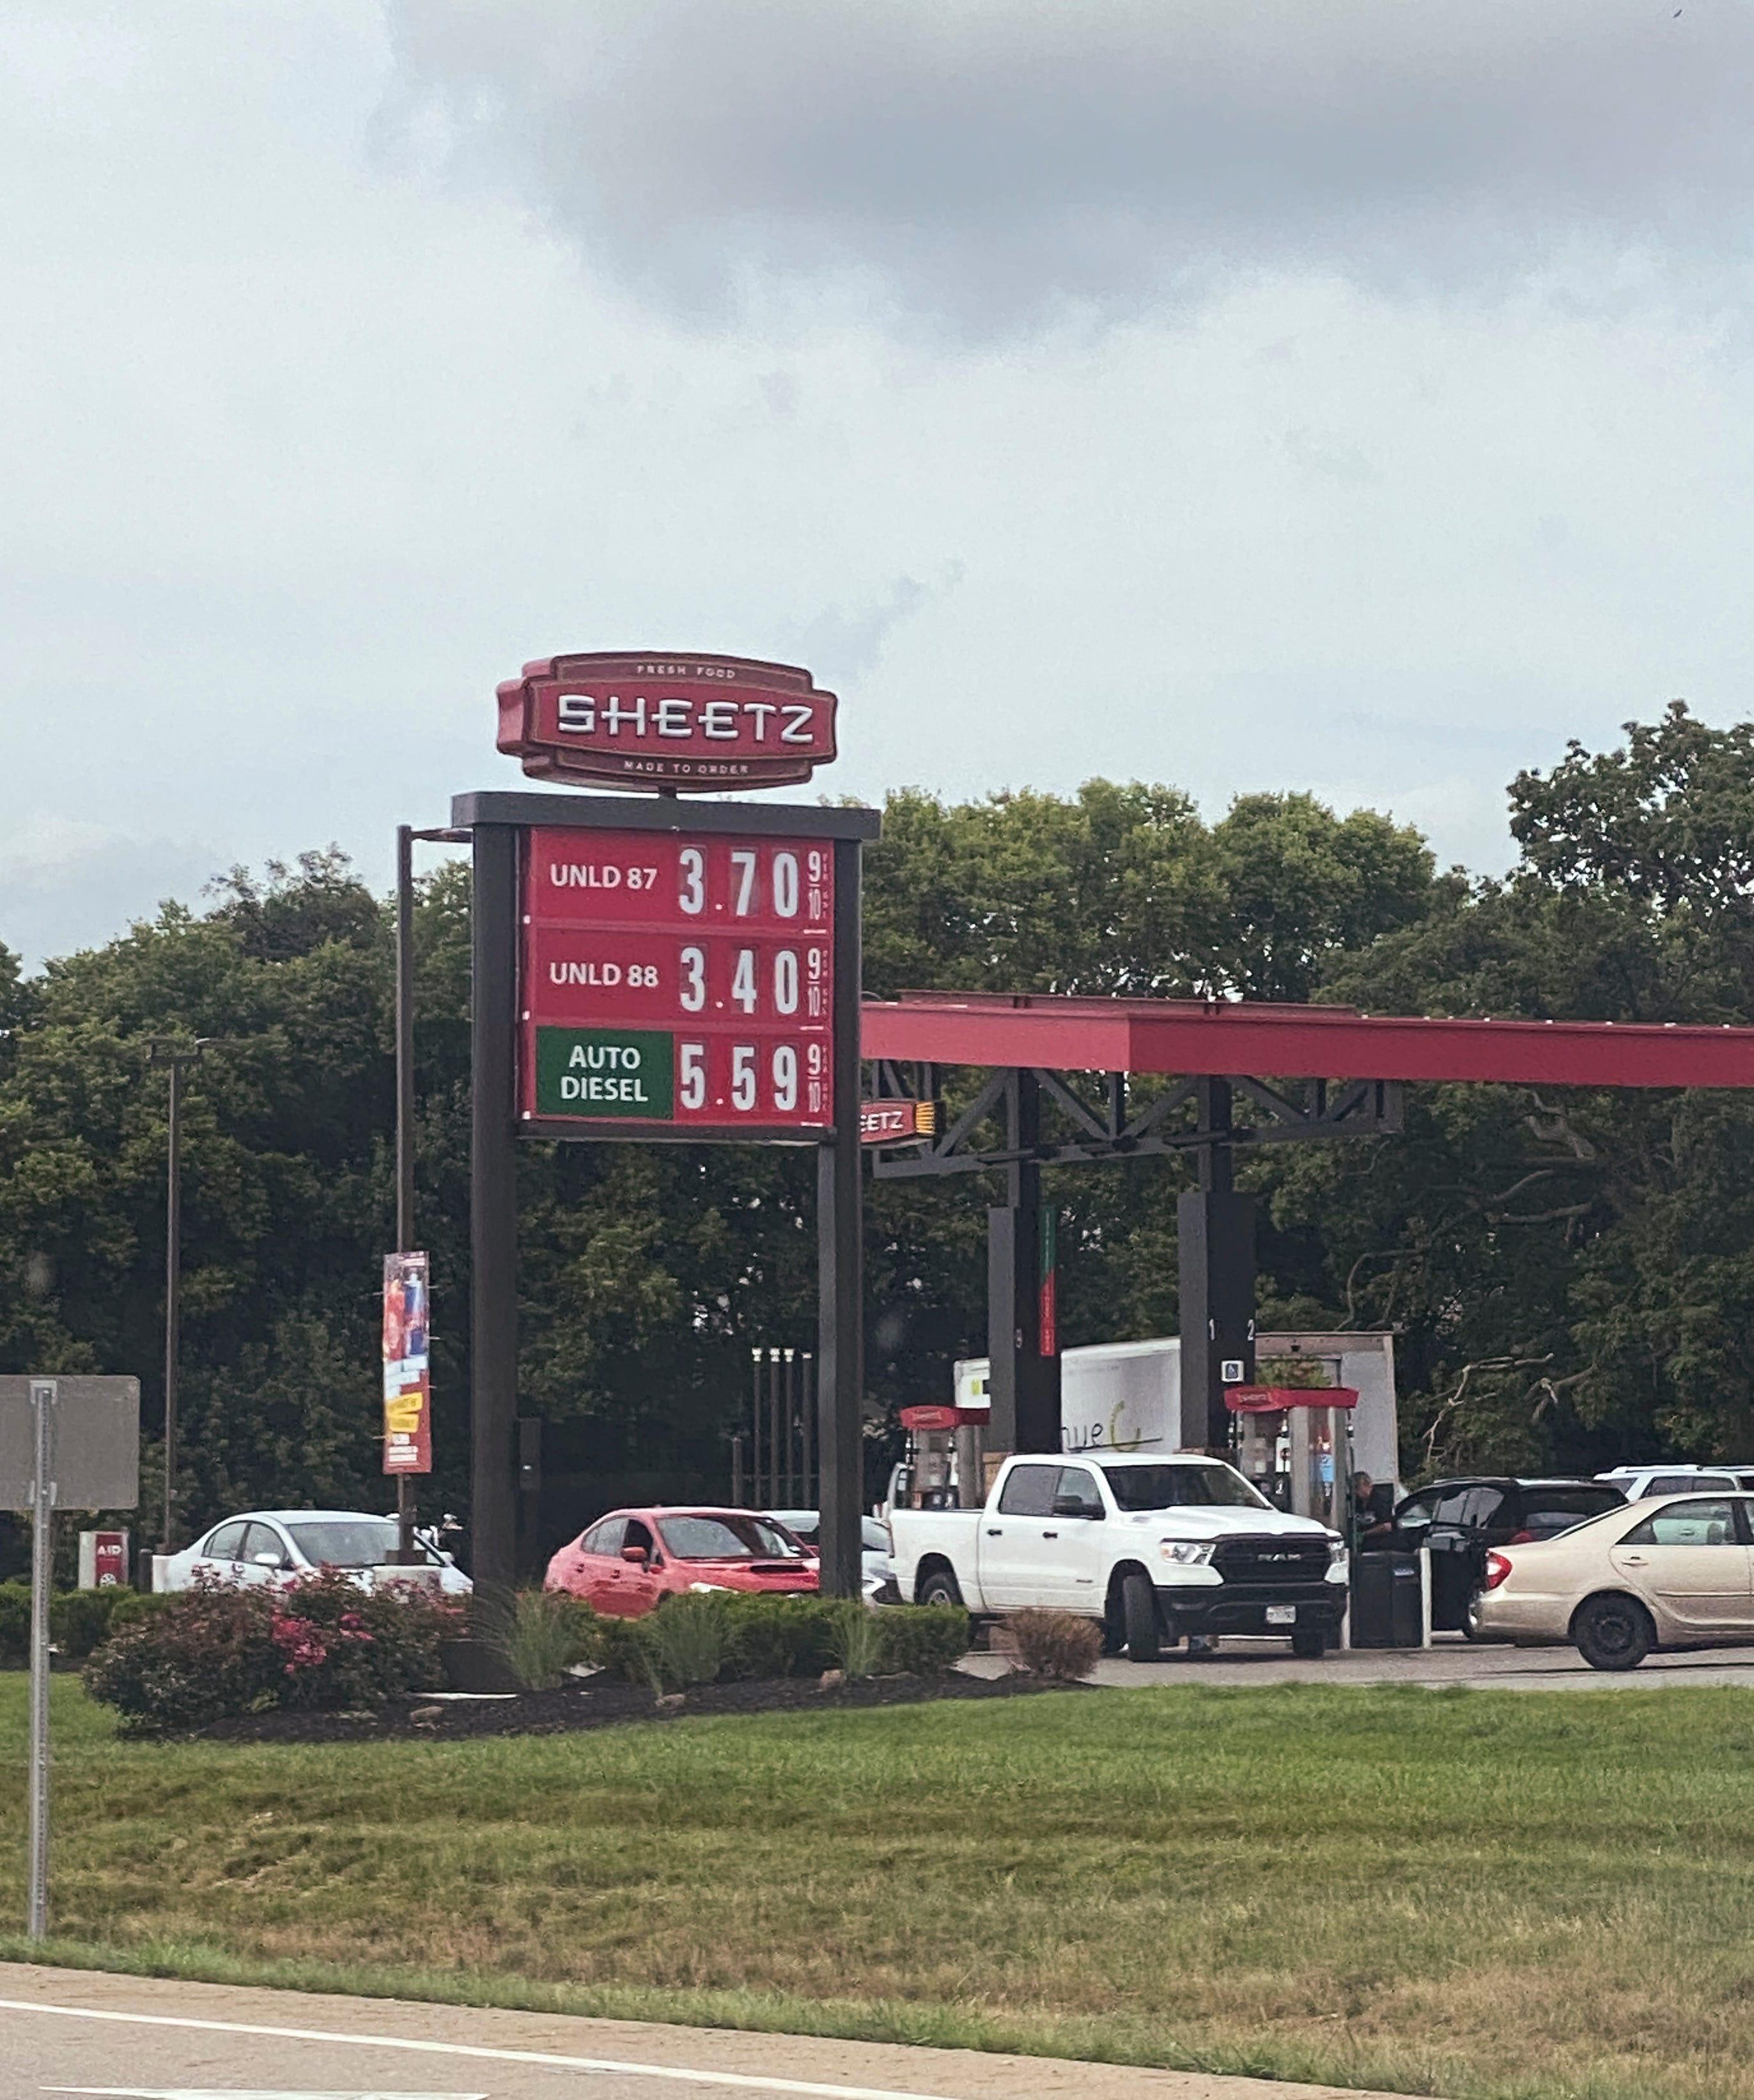 The Sheetz located on Route 23 near Circleville advertised $3.70 a gallon for unleaded 87 in July.